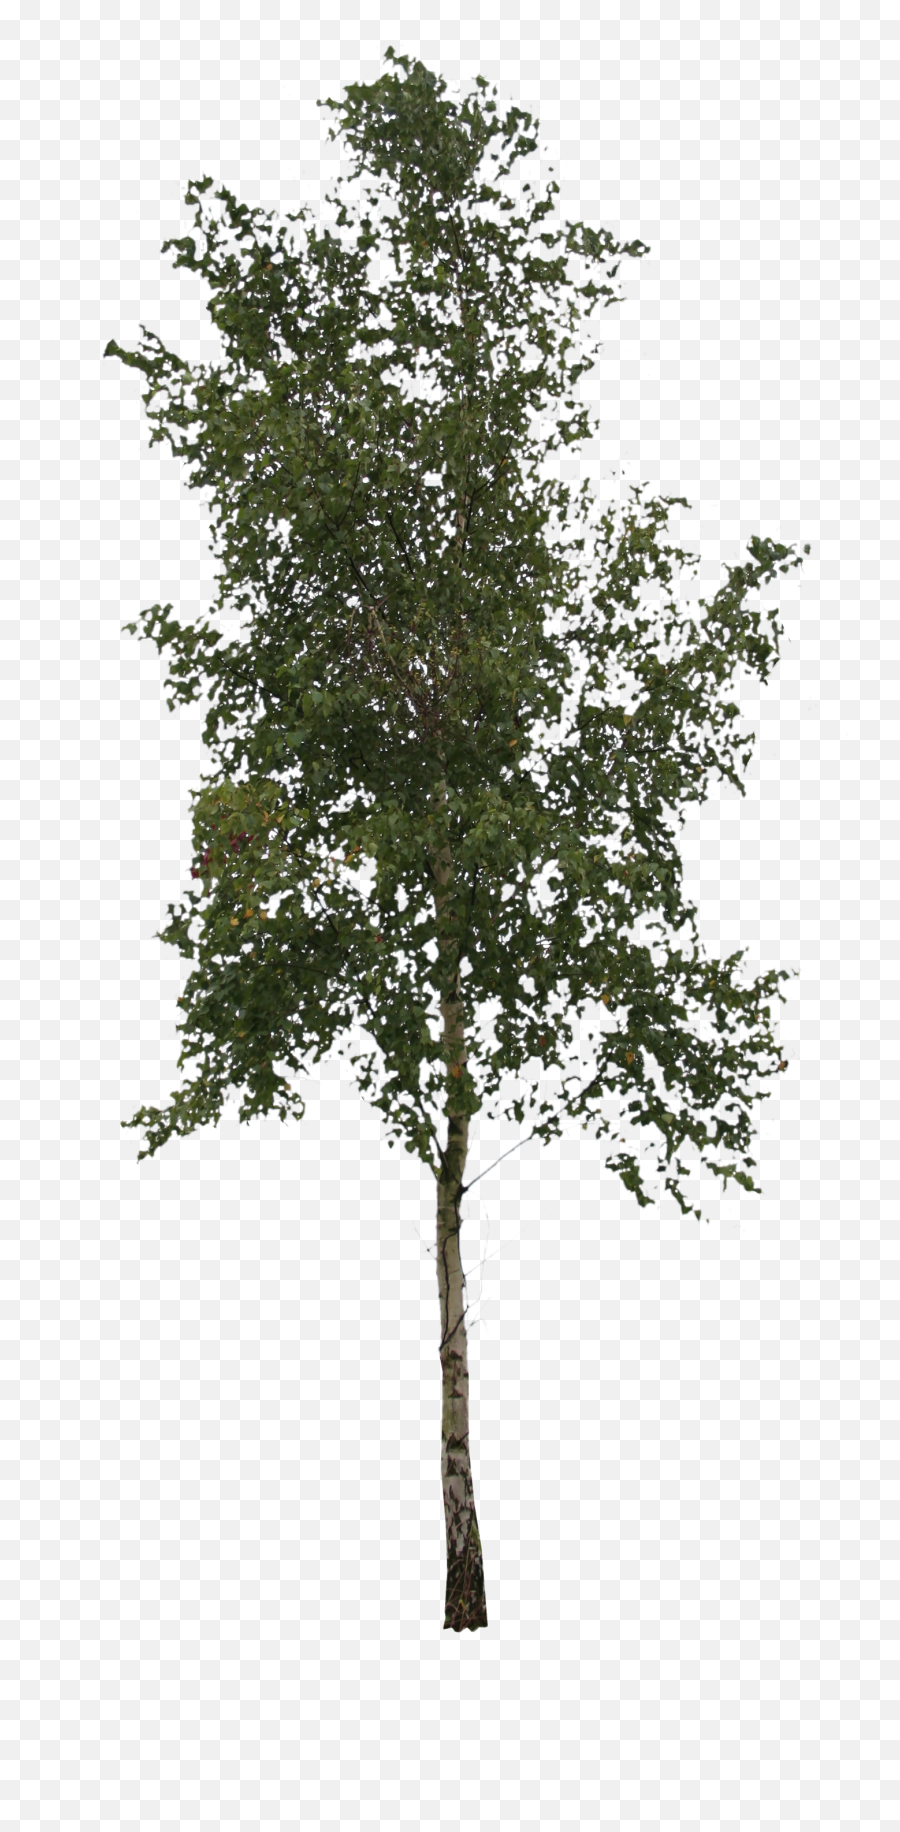 Free Cut Out Tree Birch People Trees And Leaves Png